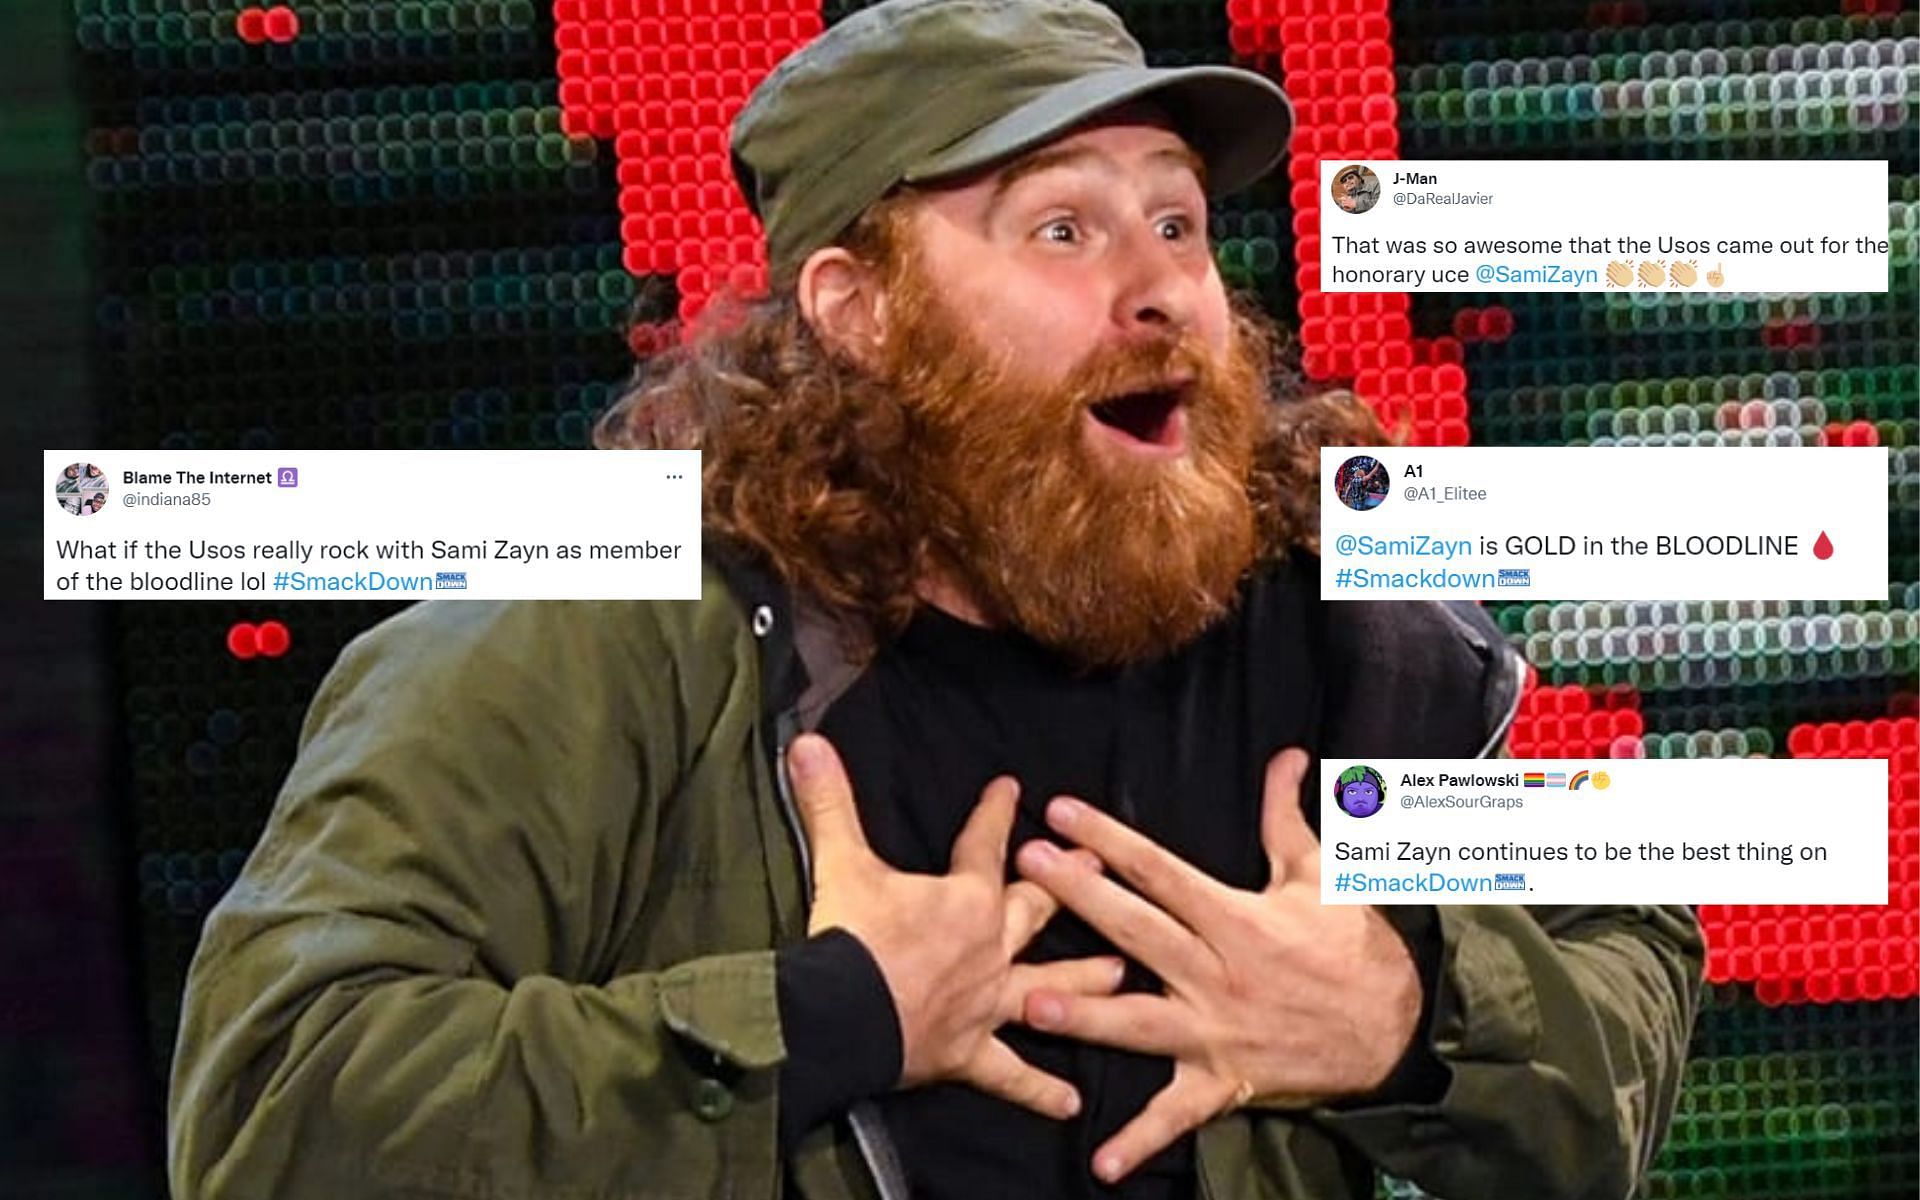 Sami Zayn has been standing up for The Bloodline over the past couple of months.